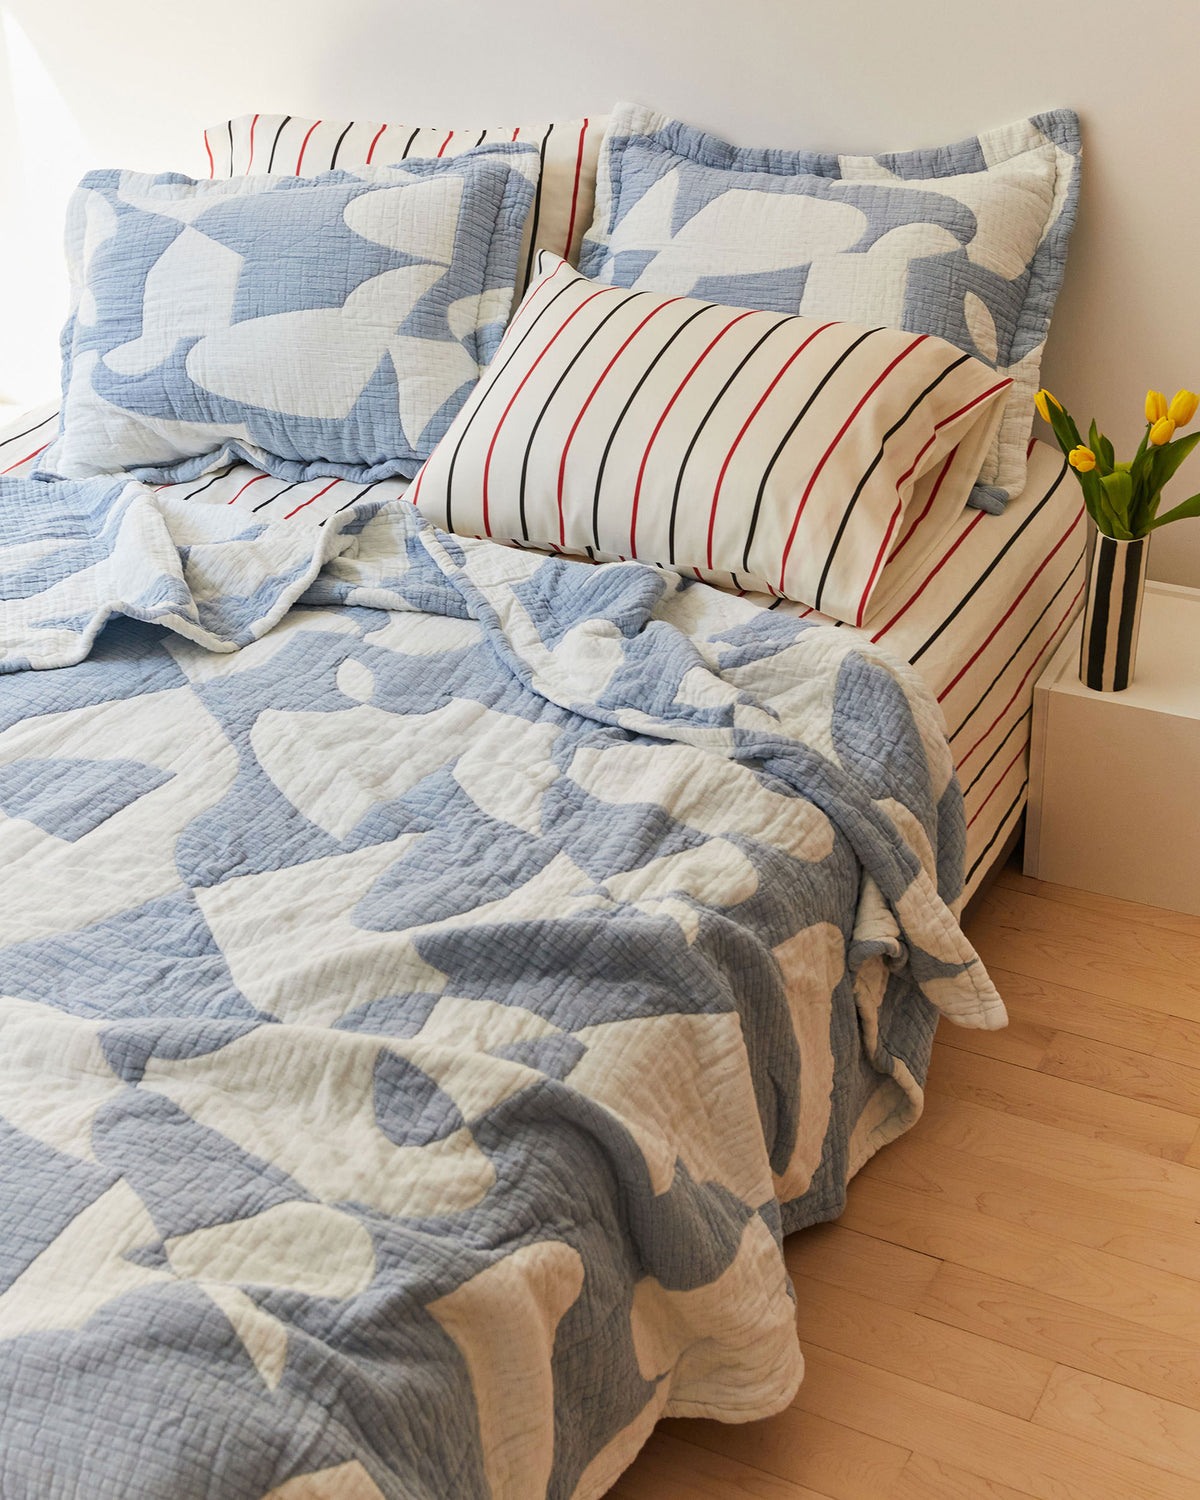 Dusen Dusen Hepta Coverlet Set. Coverlet Set in blue and white Hepta print. Woven matelassé coverlet with inner layer of insulation for a quilted effect. Stone washed, with an extra soft and gauzy hand feel. 100% cotton shell, polyester fill. Machine wash cold and tumble dry low. Made in Portugal.